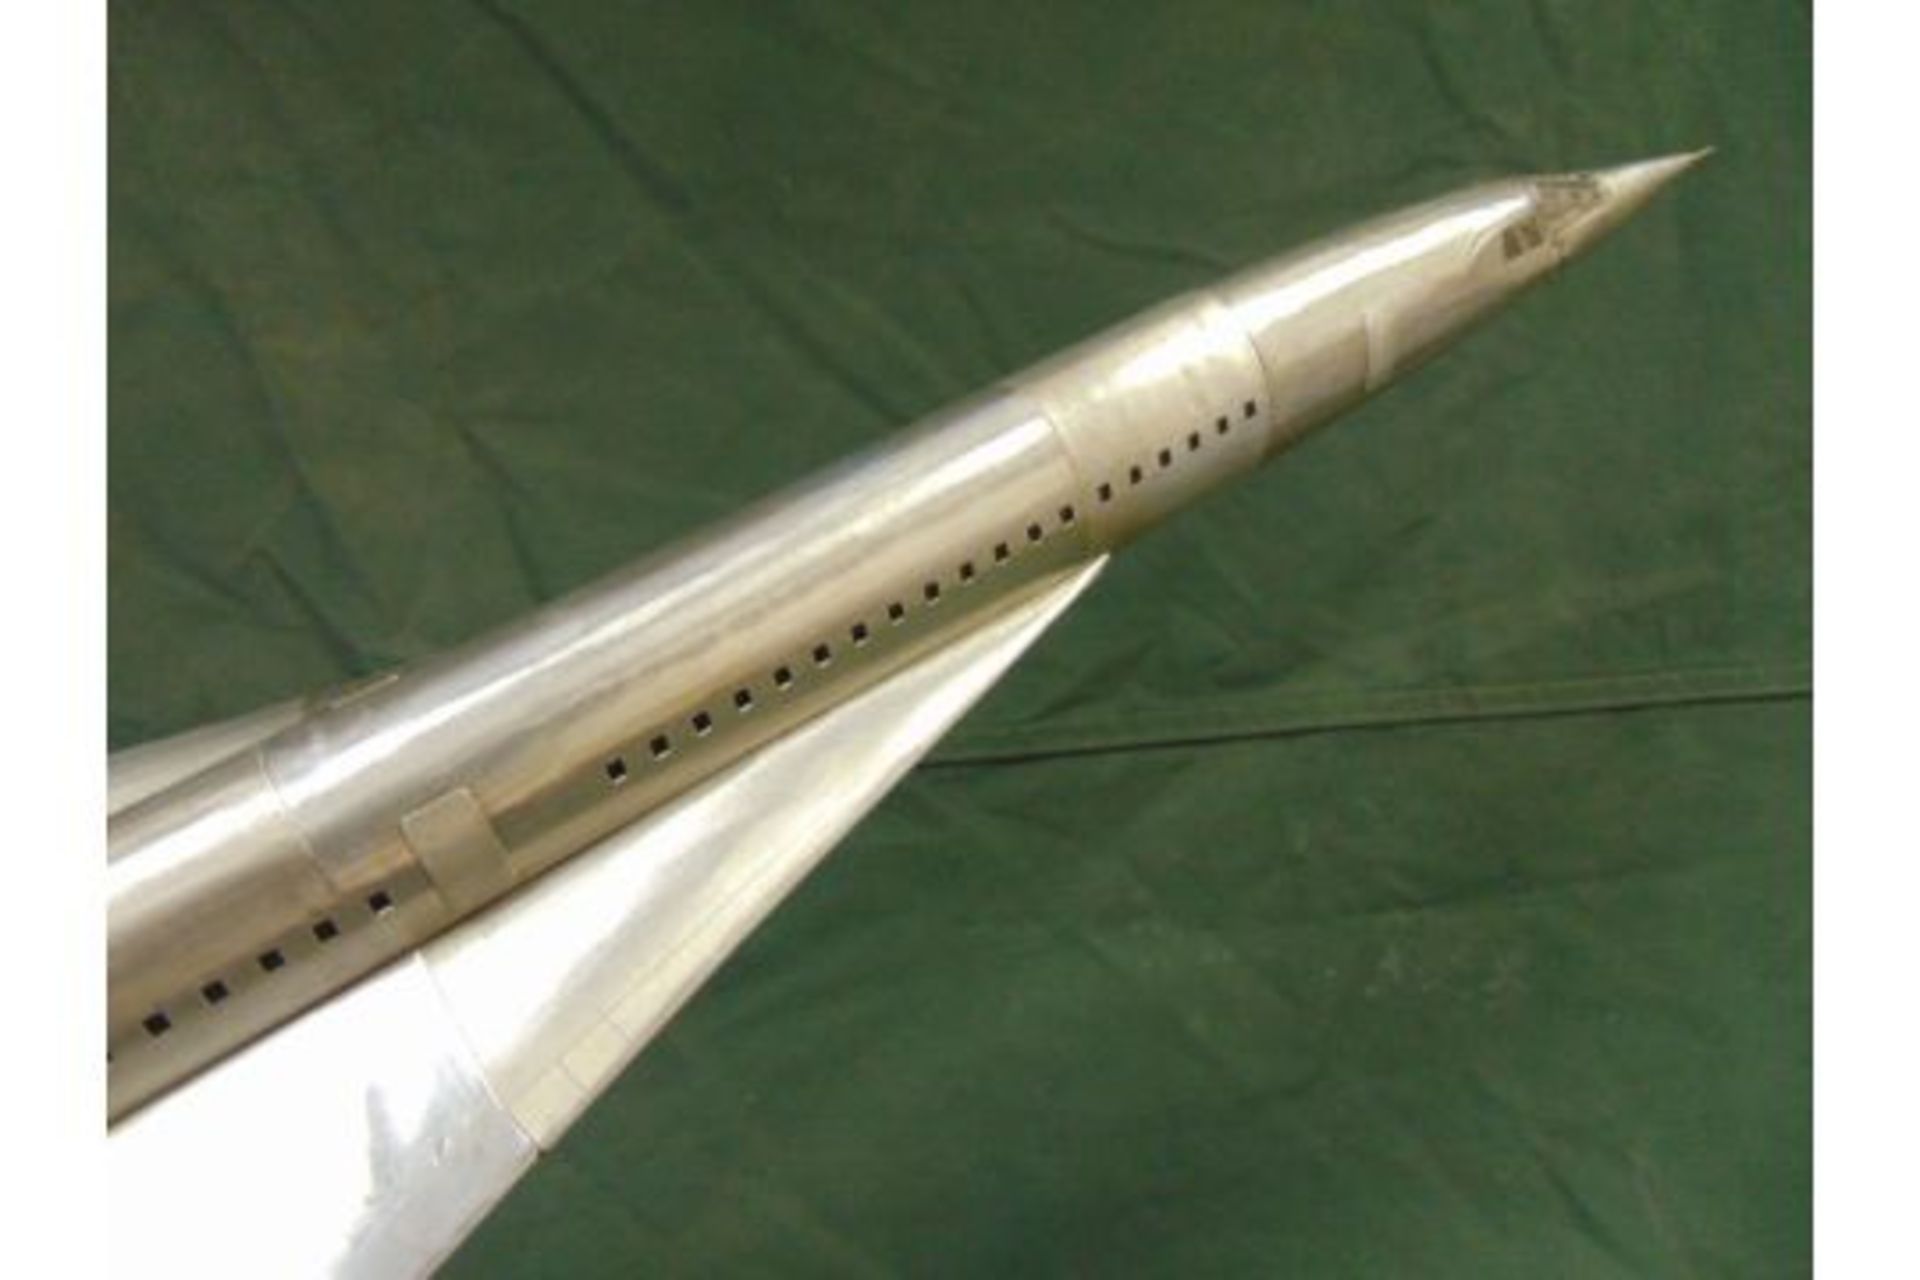 JUST LANDED A BEAUTIFUL!! Large Aluminium CONCORDE Model - Image 5 of 14